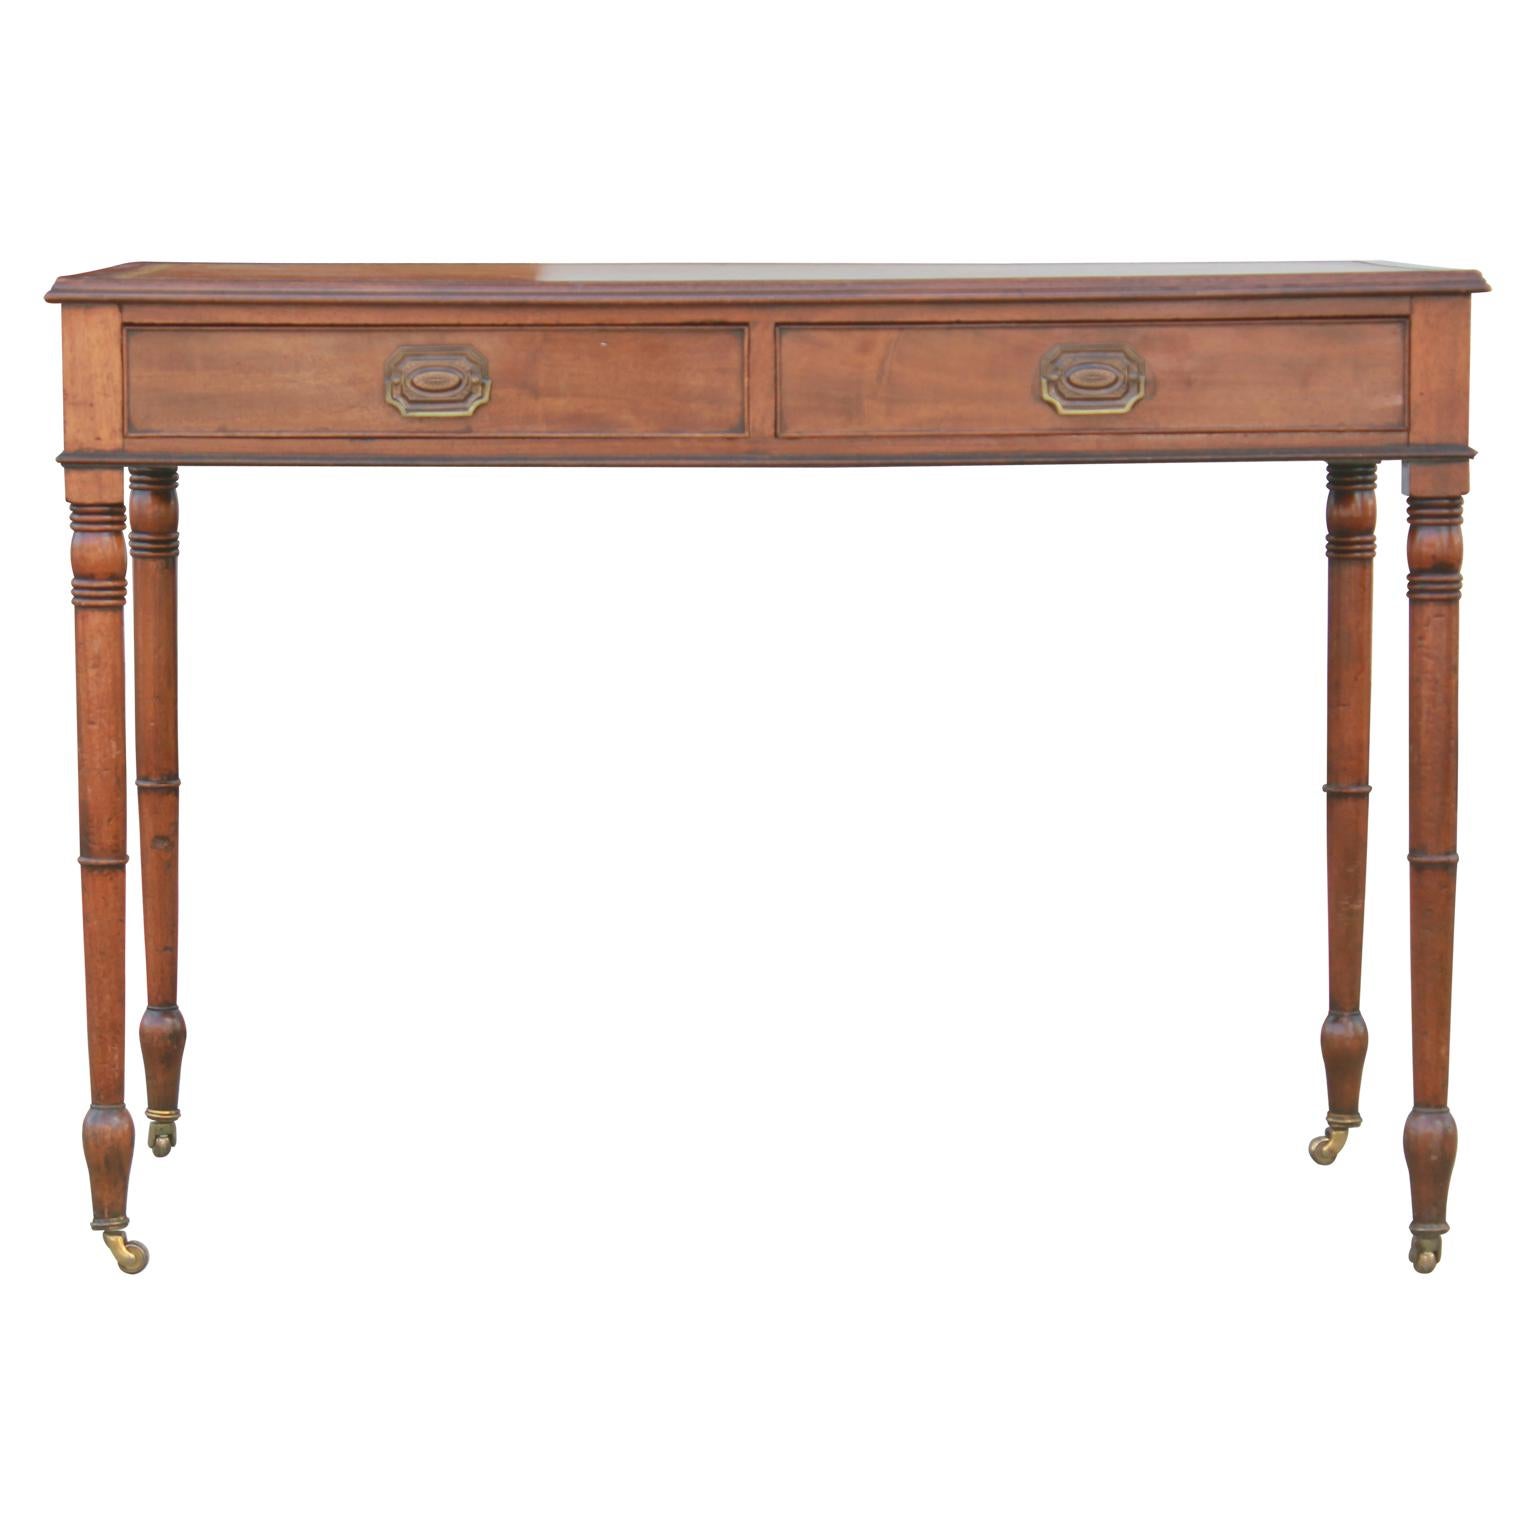 Mid-19th Century English Leather Top Two-Drawer Writing Desk